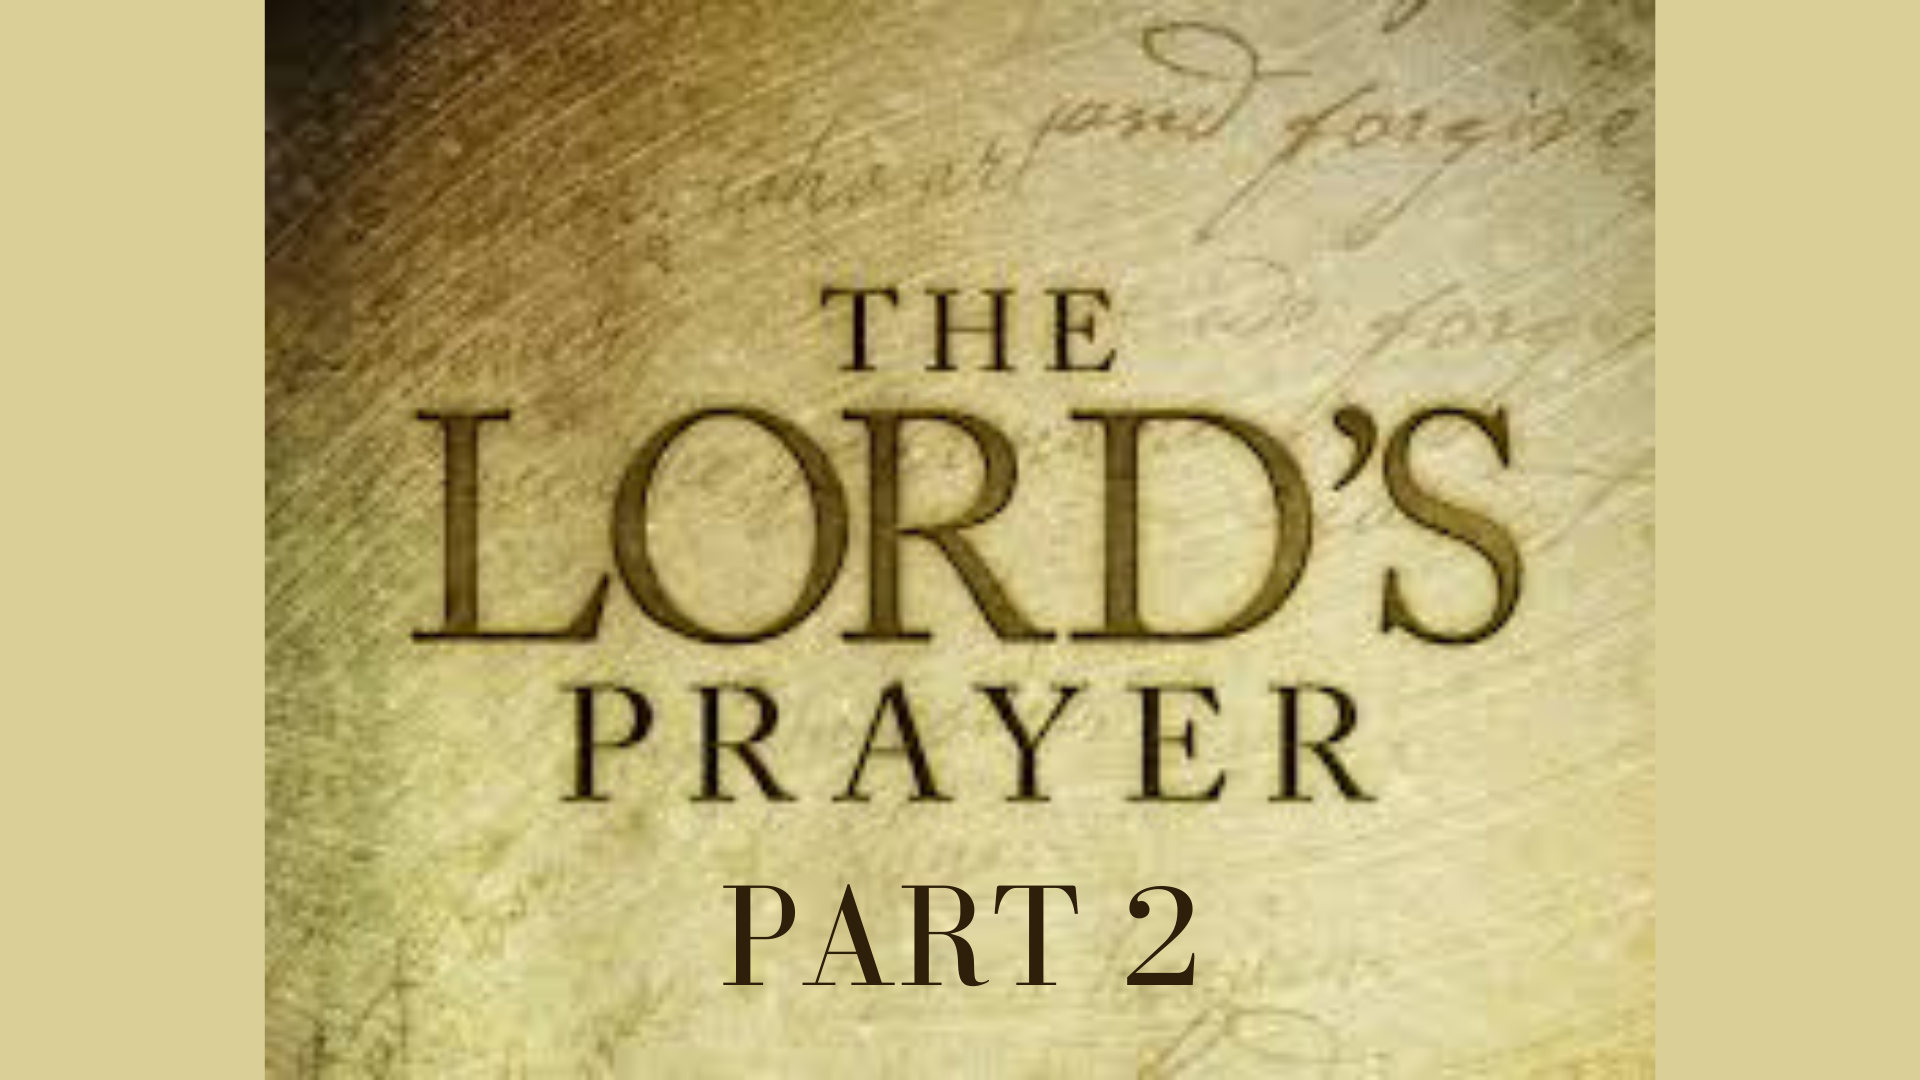 The Lord’s Prayer, Part 2